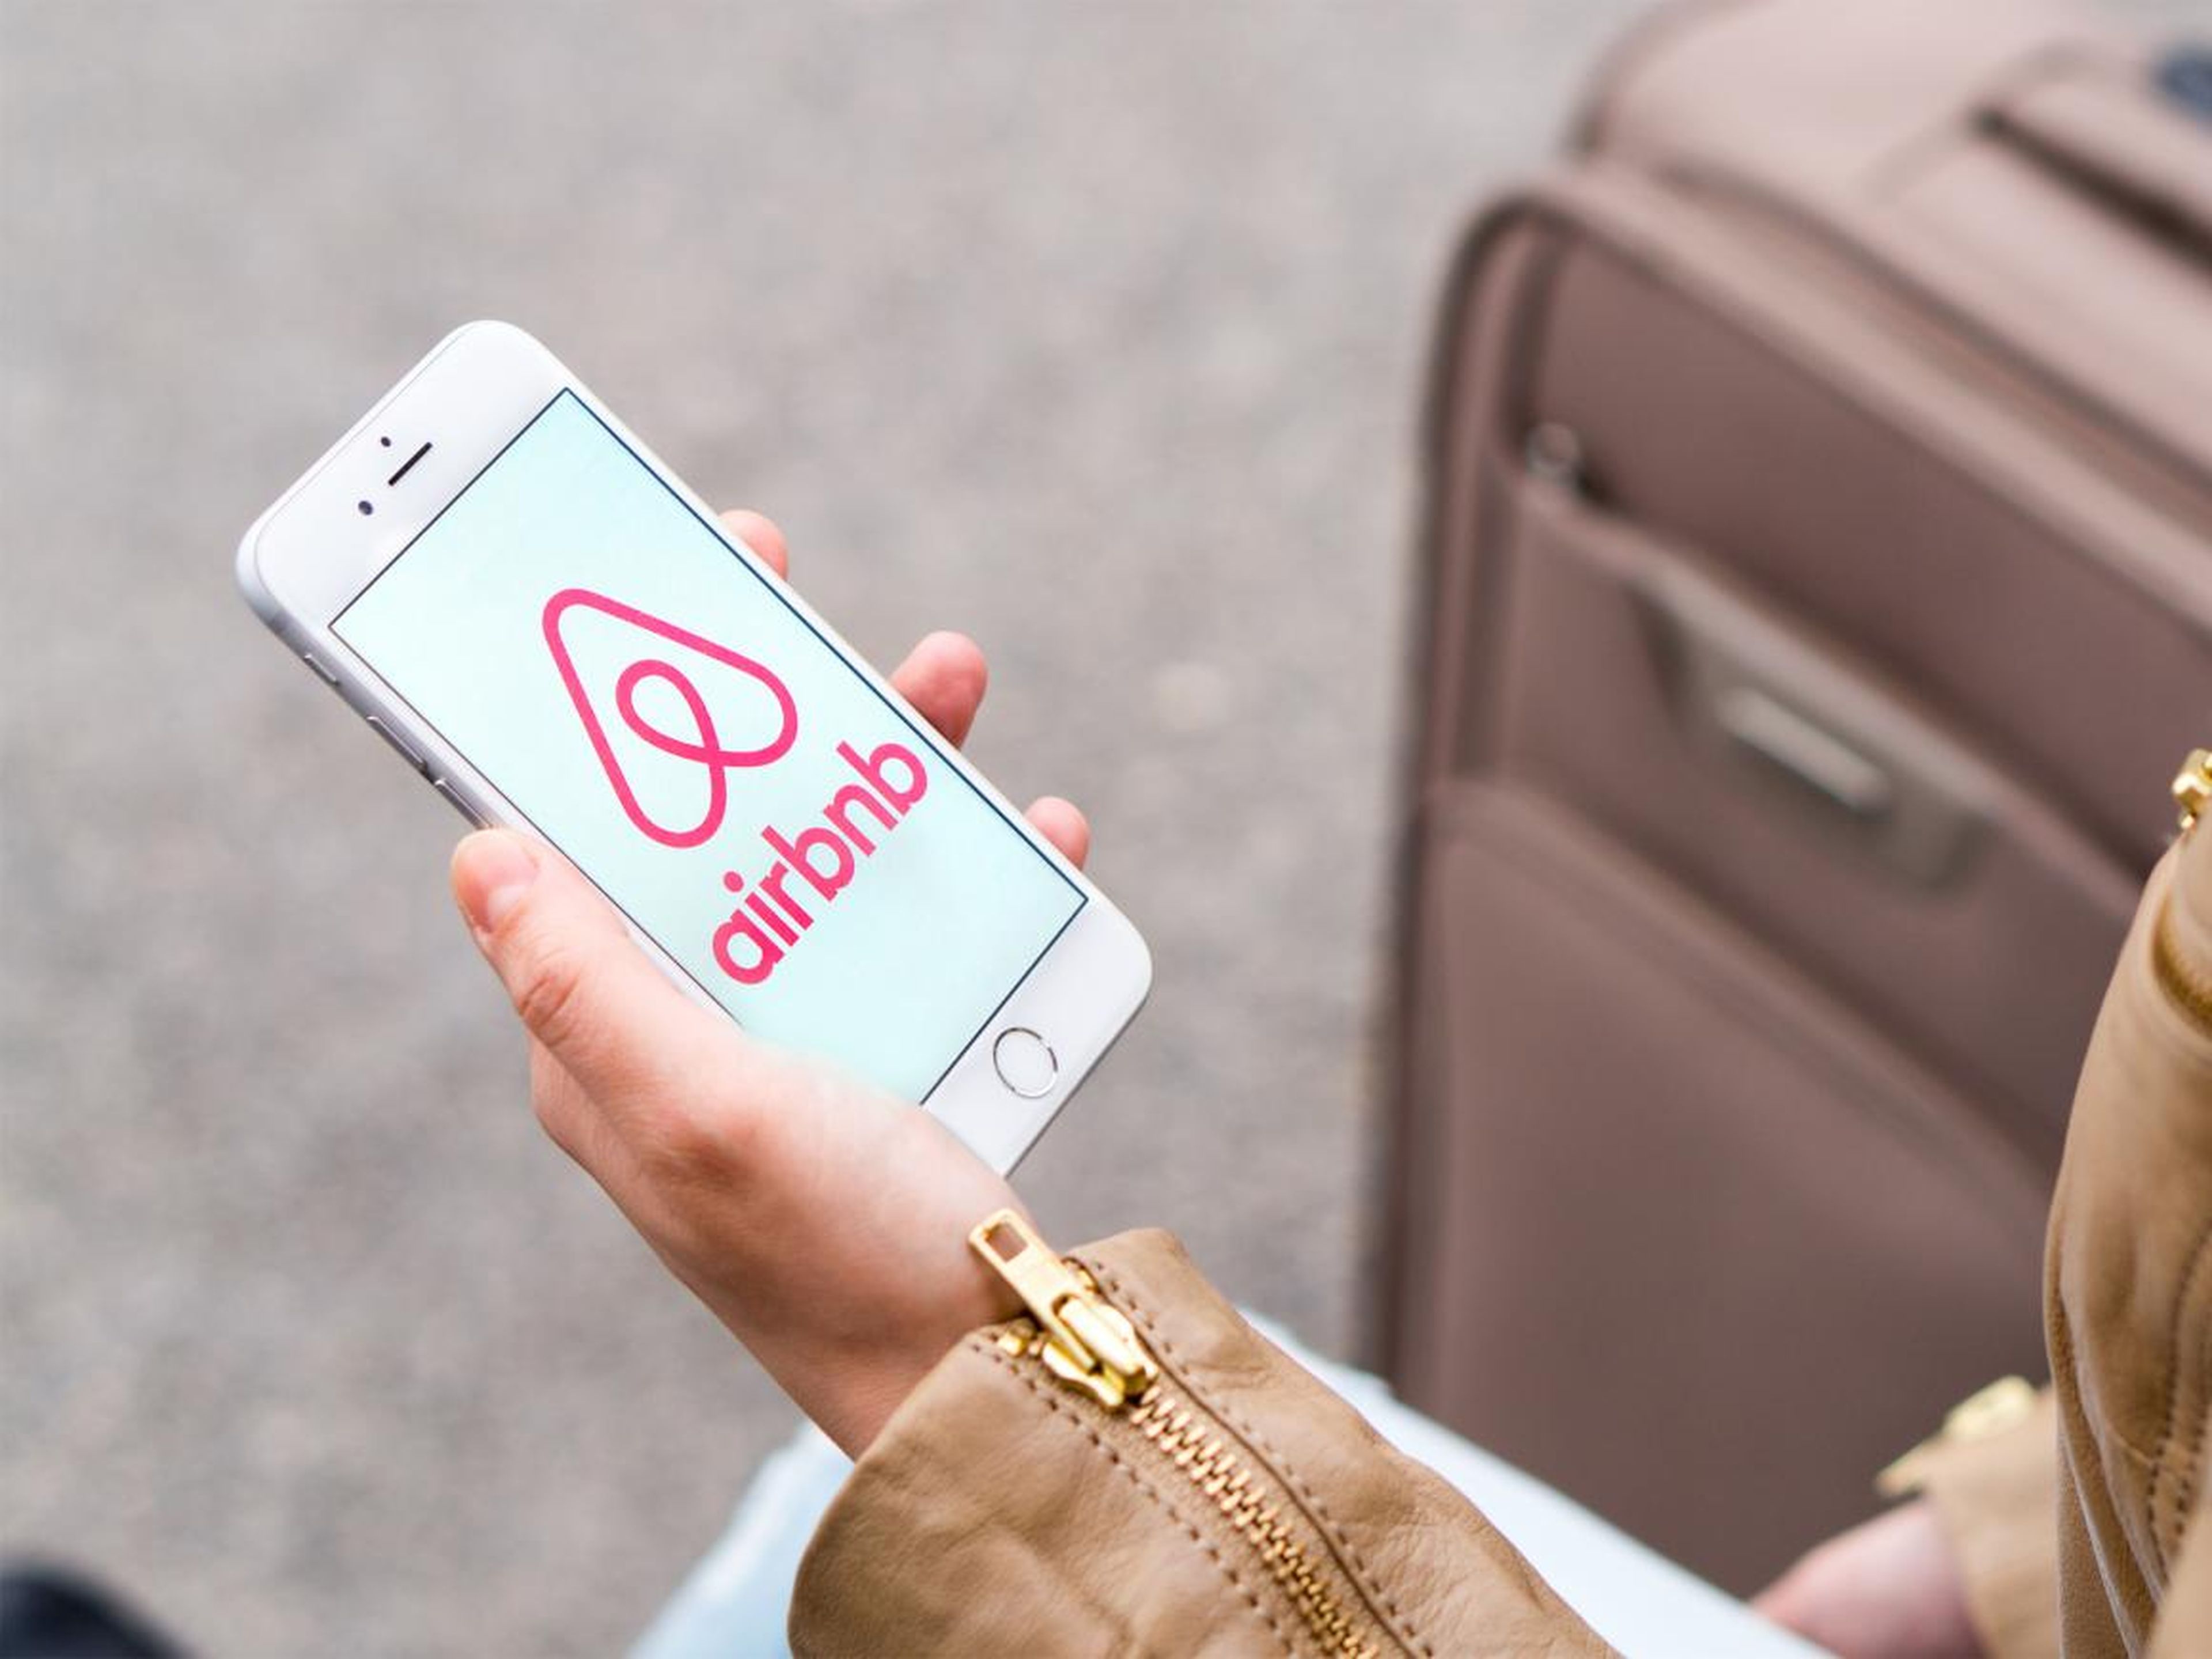 Airbnb has patented software that digs through social media to root out people who display 'narcissism or psychopathy'